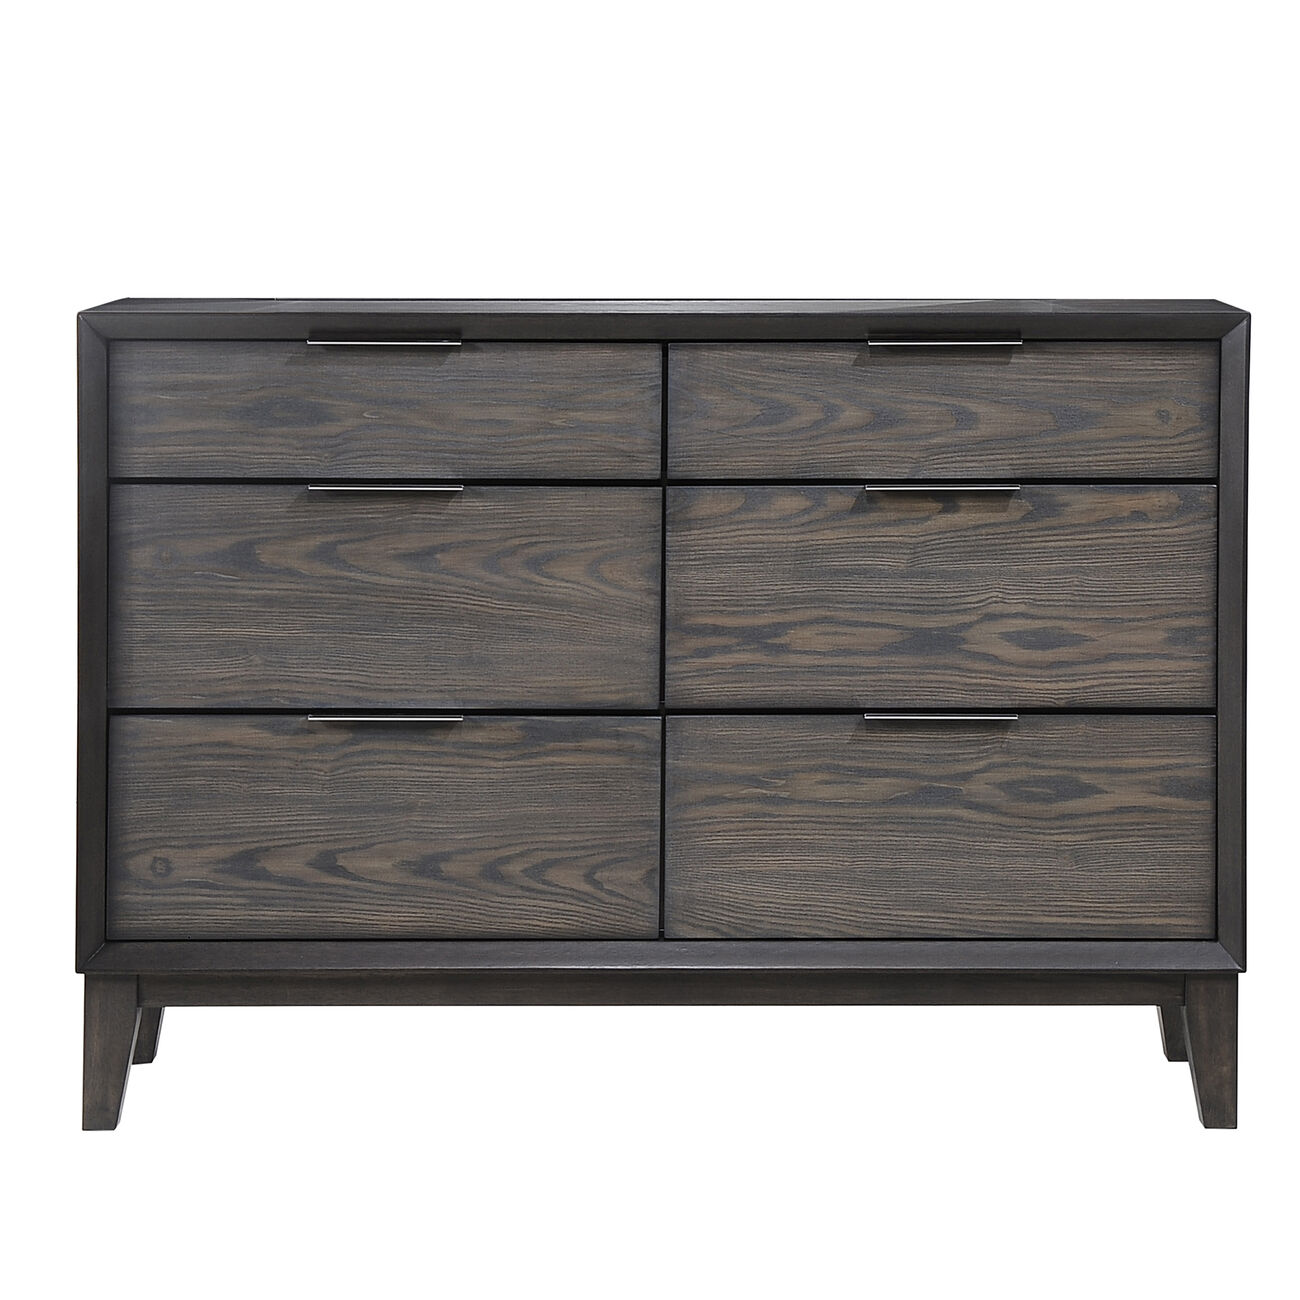 Wooden Six Drawer Dresser with Metal Pulls and Chamfered Legs, Gray